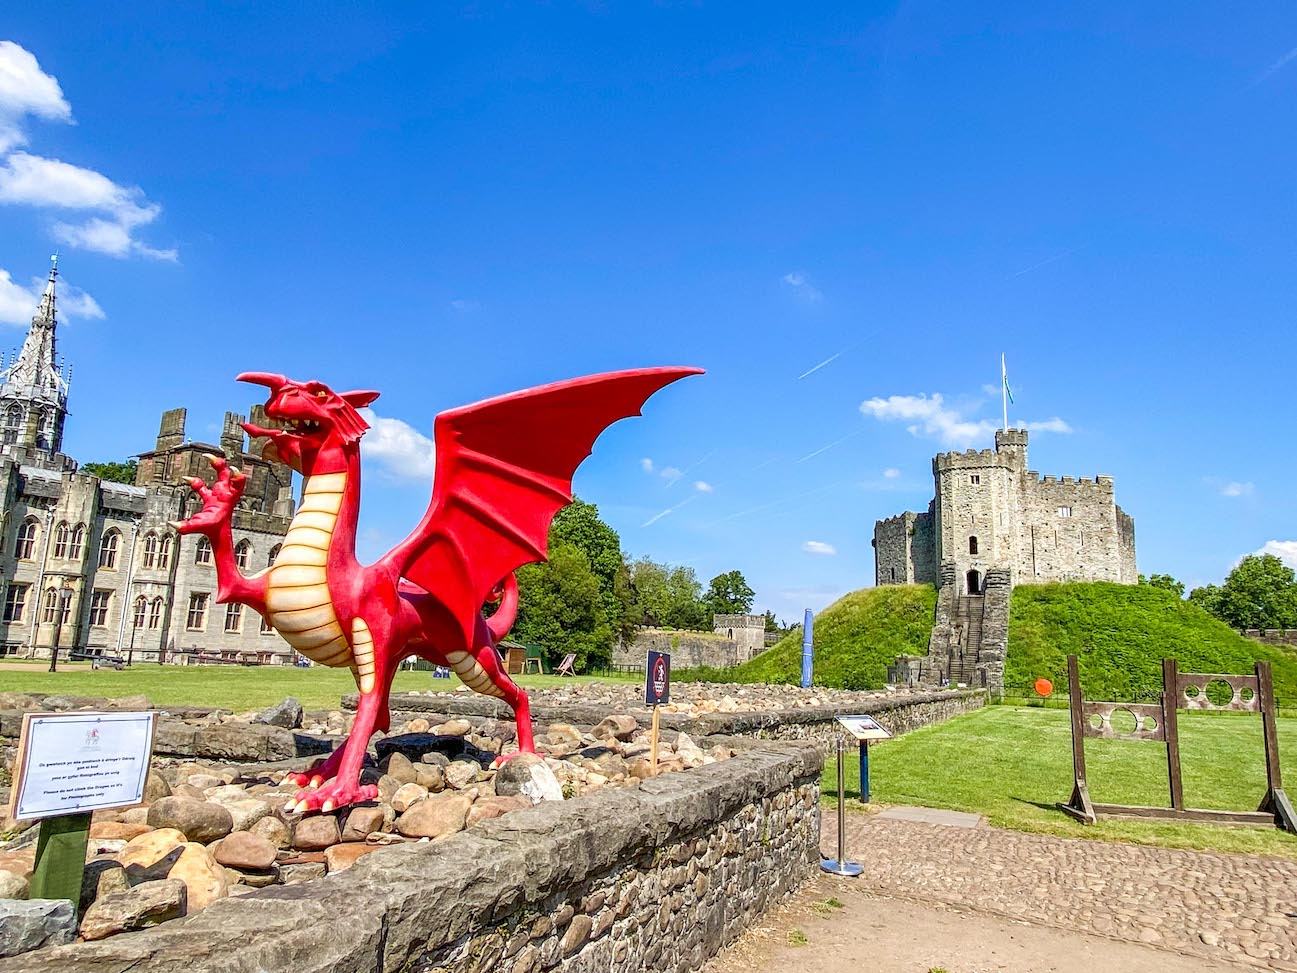 One Day in Cardiff, Cardiff Castle